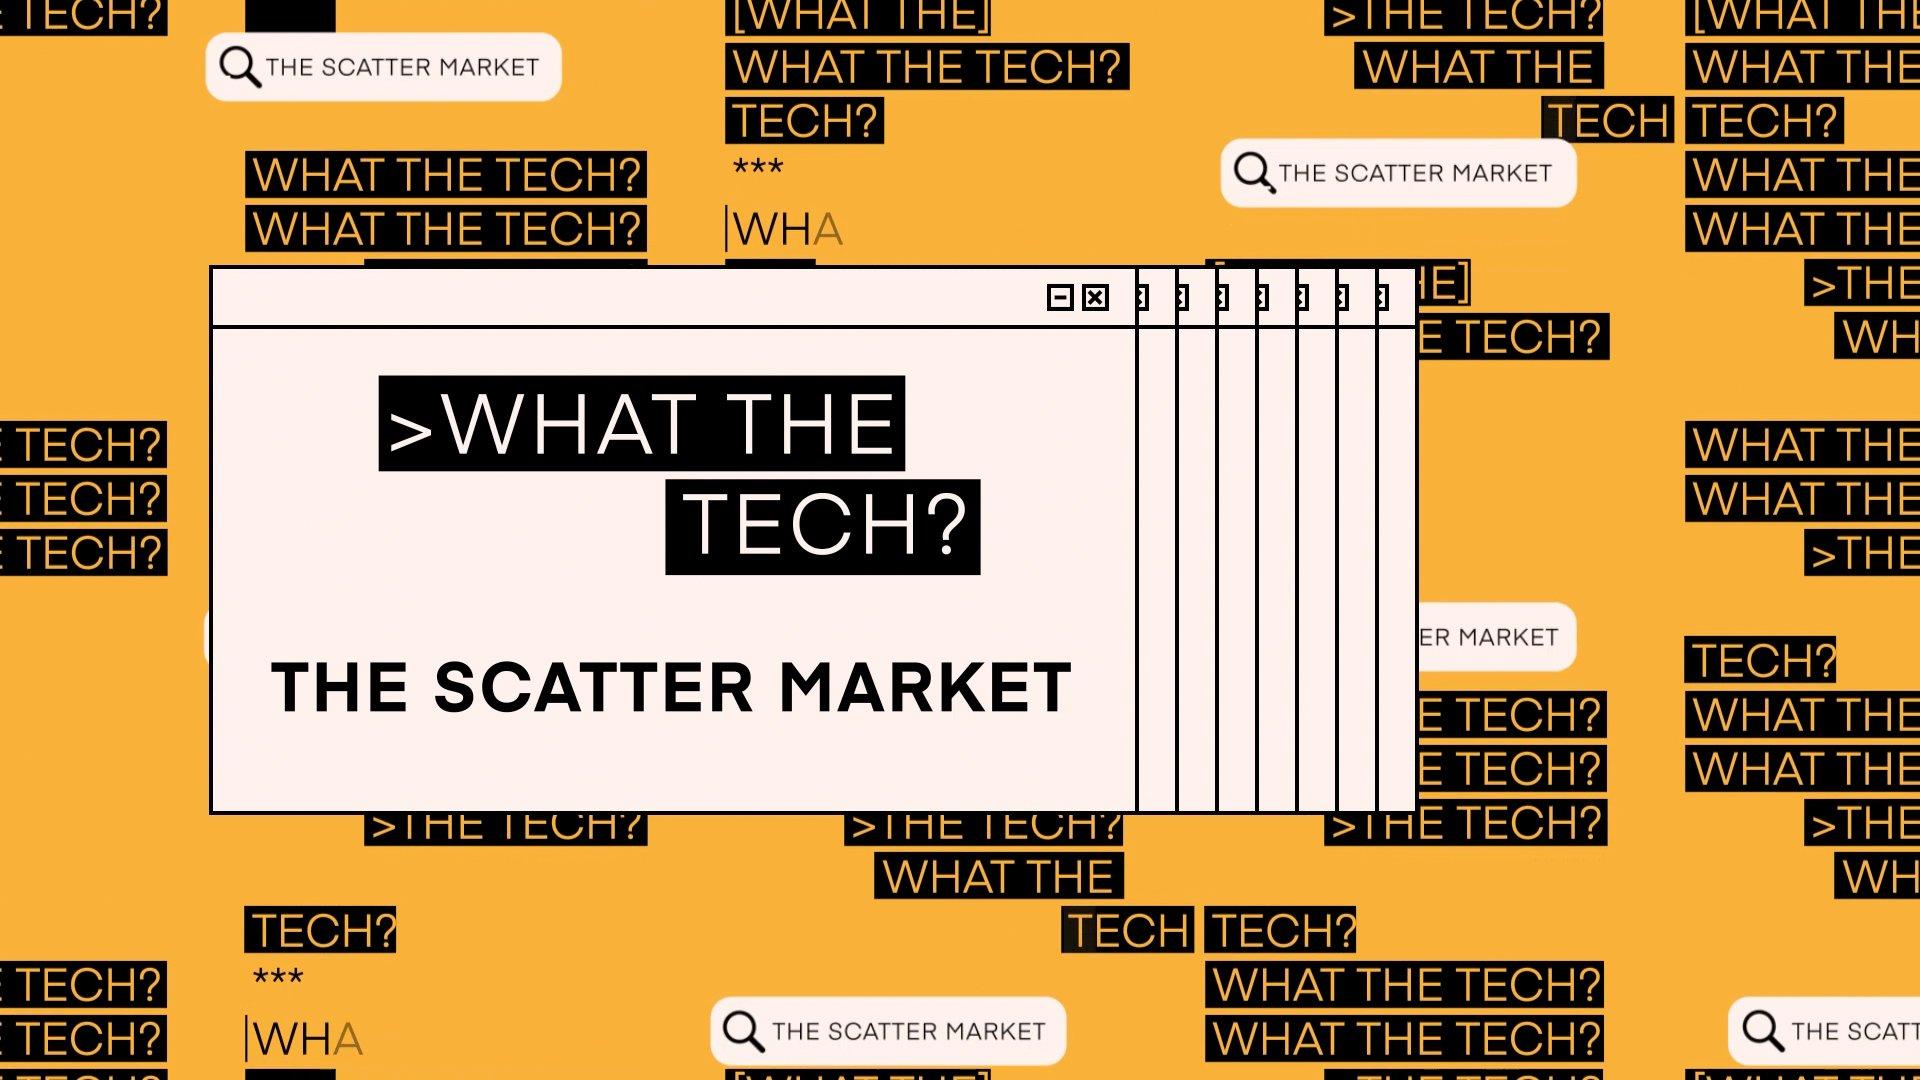 What the Tech is the scatter market?